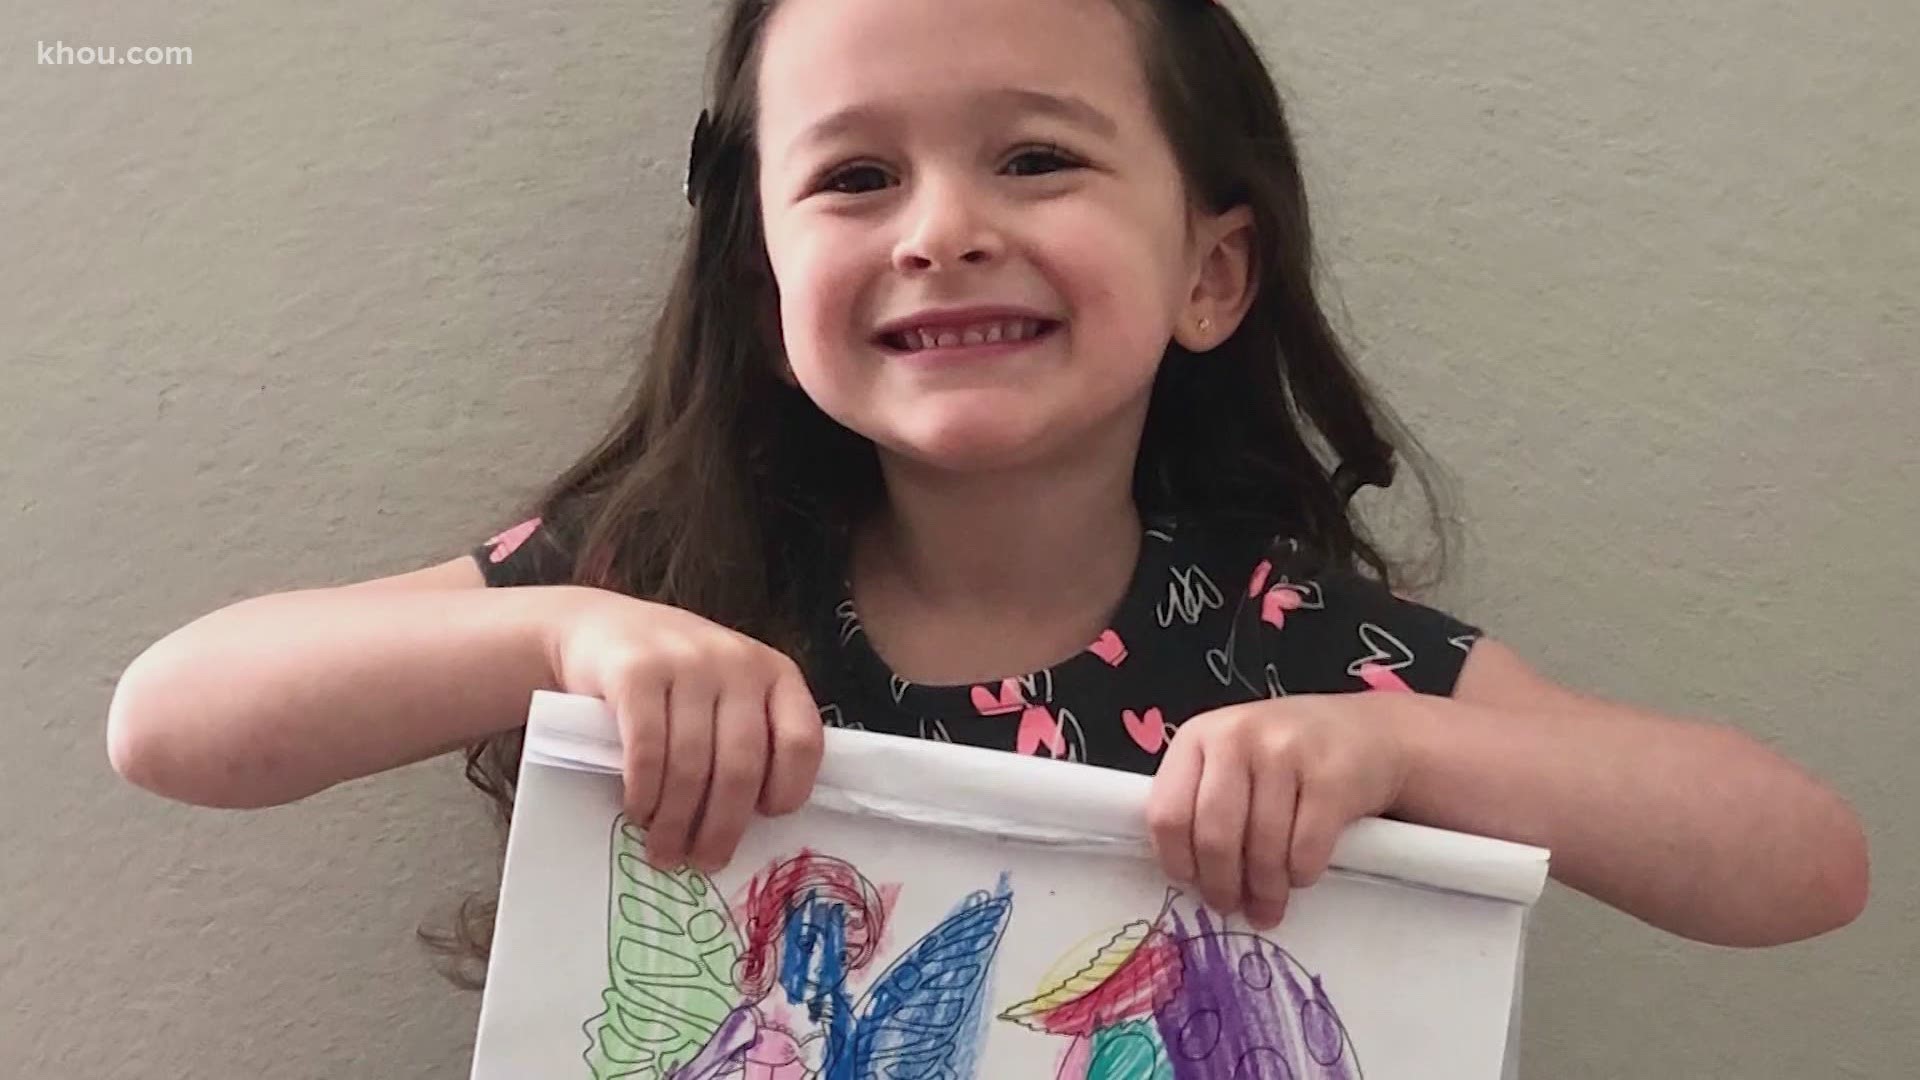 First Service Residential sent the family a violation notice calling 4-year-old Giuliana's colored pictures "unsightly articles" that would drop property values.